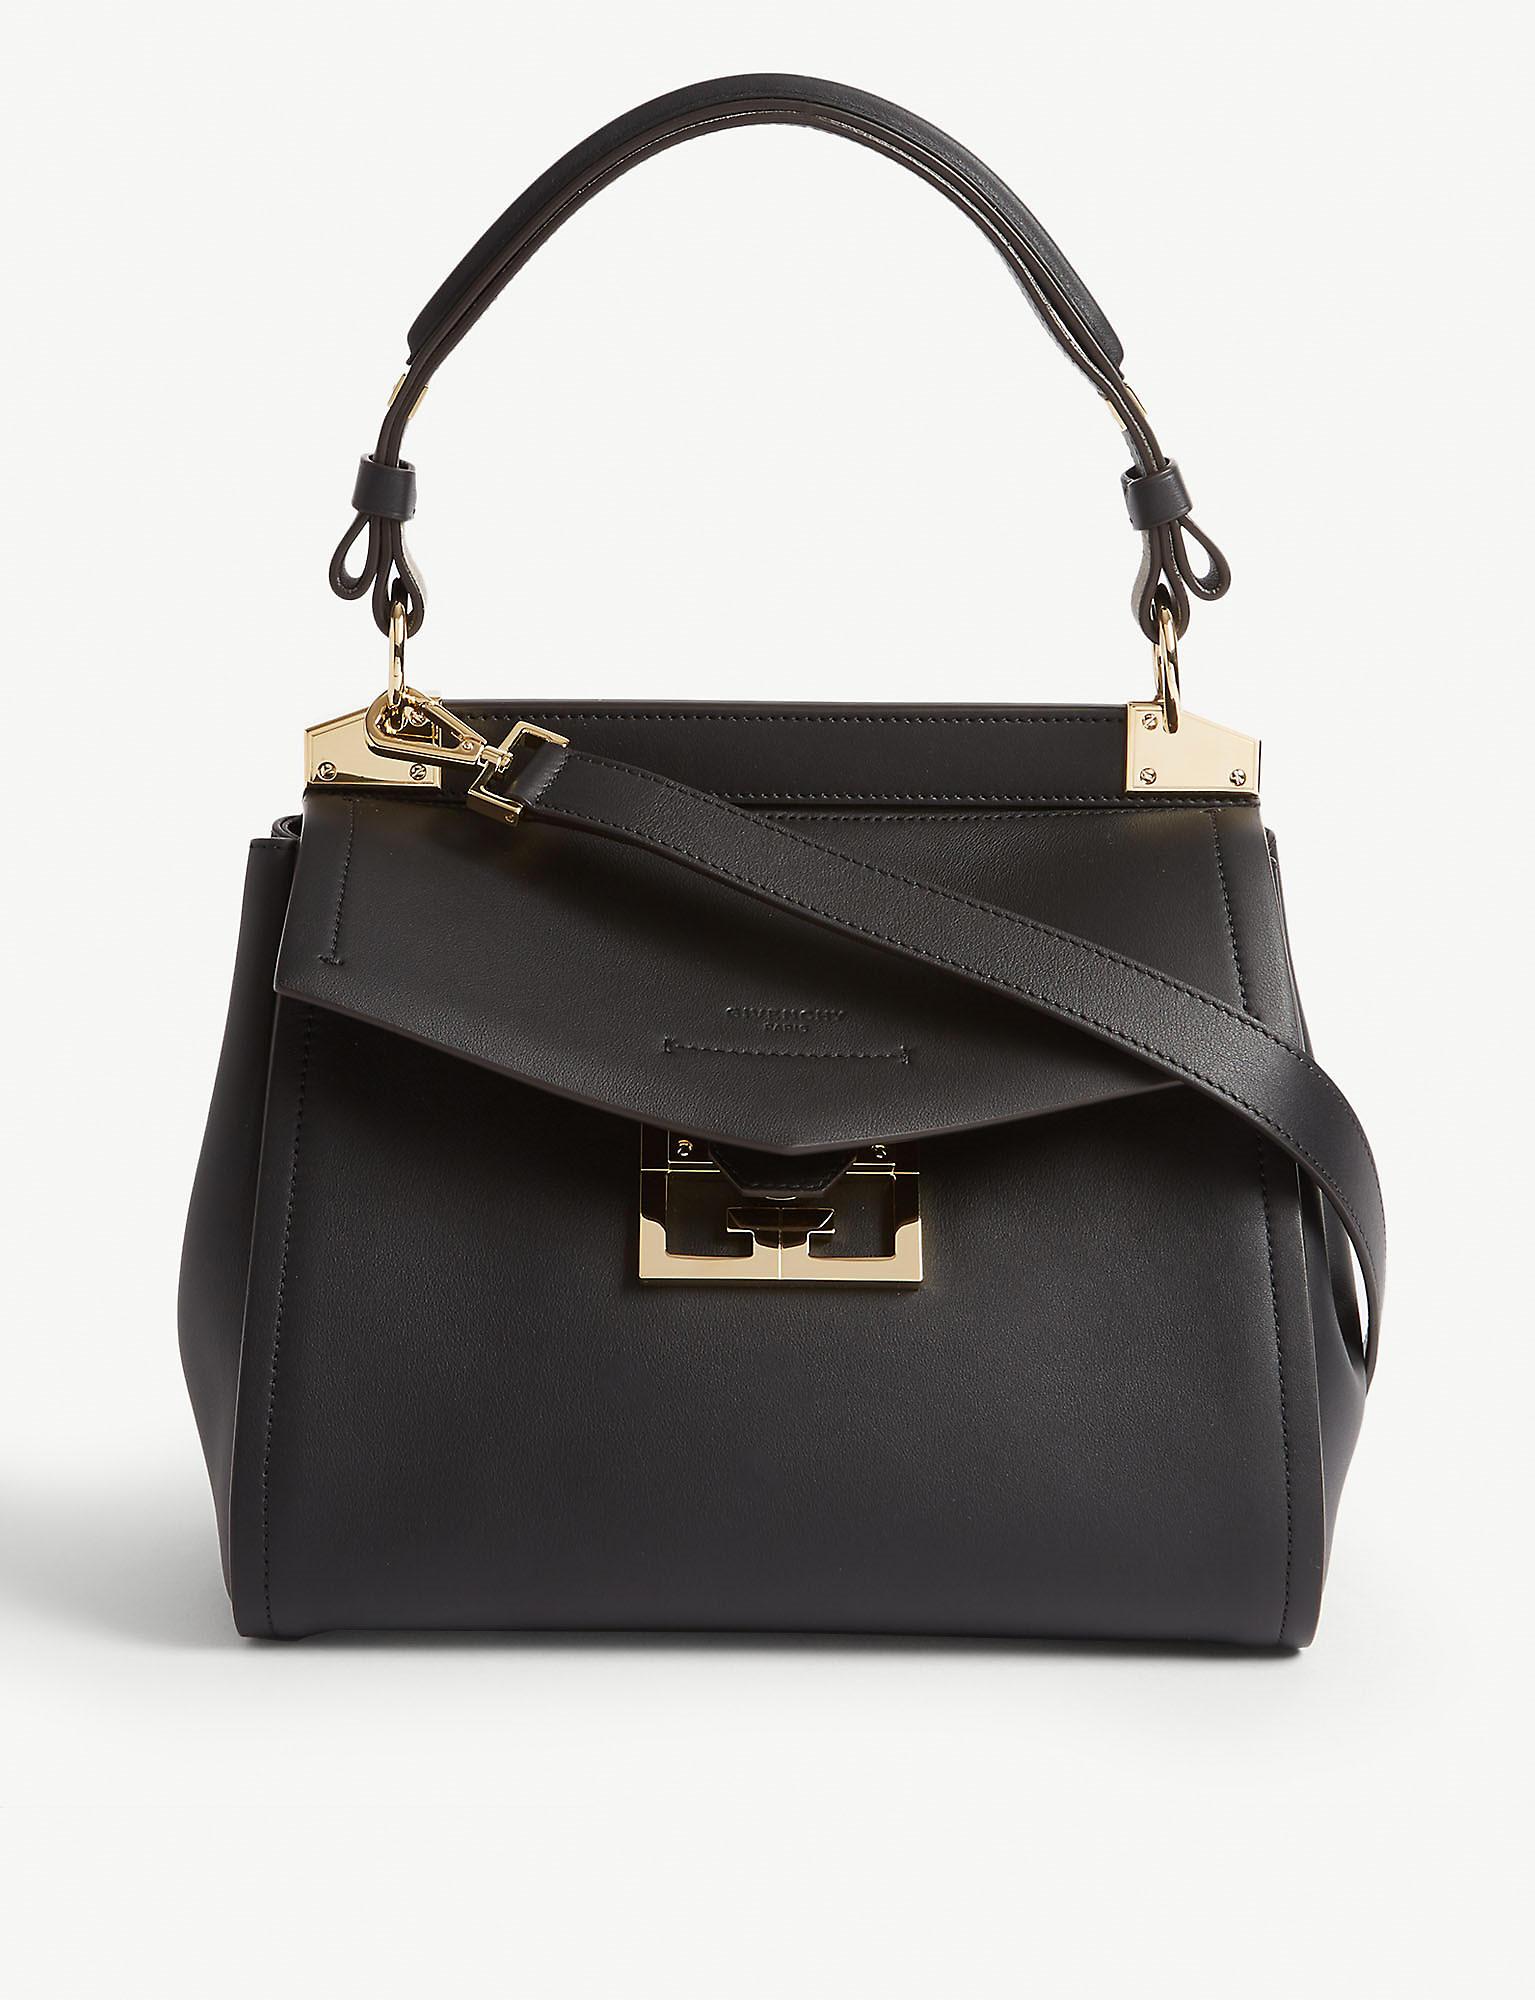 Givenchy Mystic Small Leather Top Handle Bag in Black - Lyst